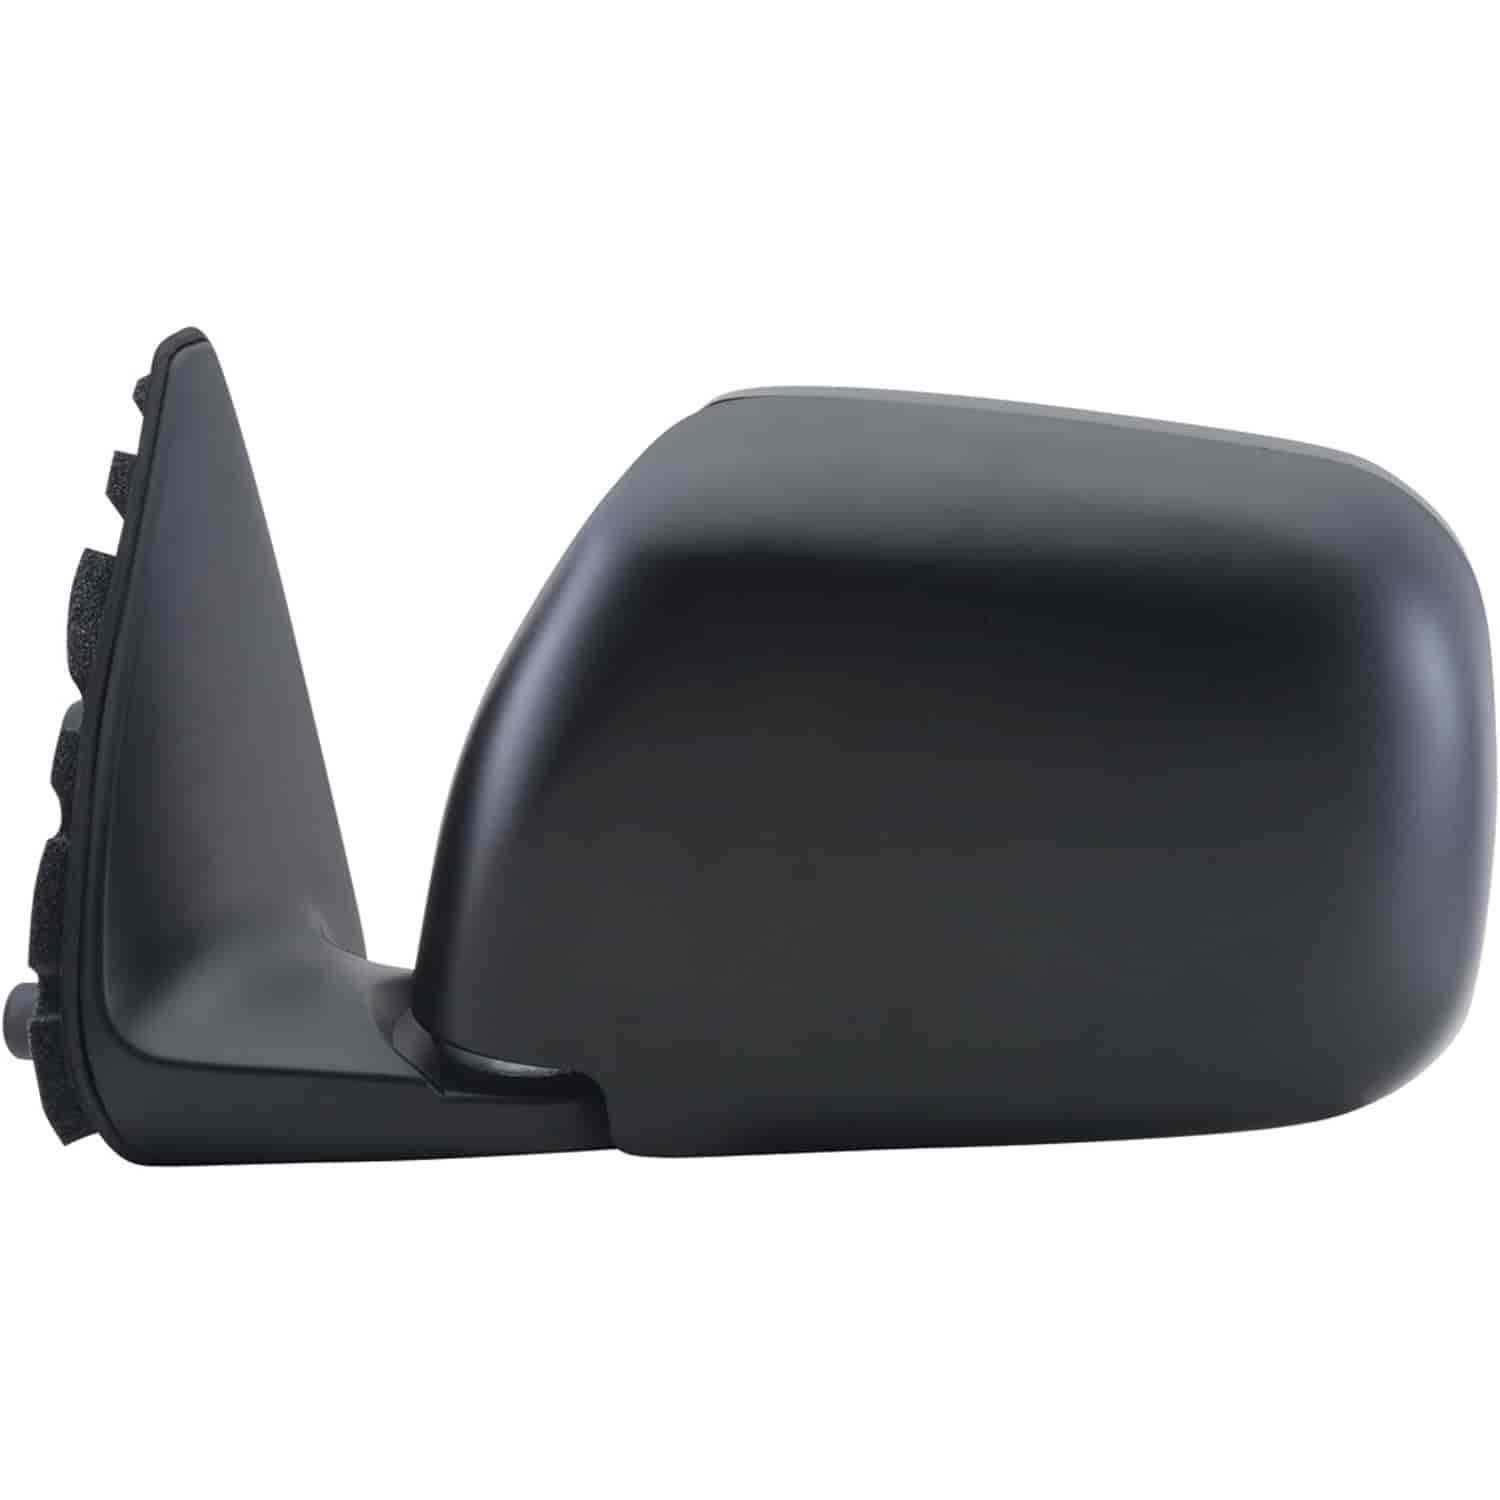 OEM Style Replacement mirror for 96-98 Toyota T-100 Pick-Up driver side mirror tested to fit and fun